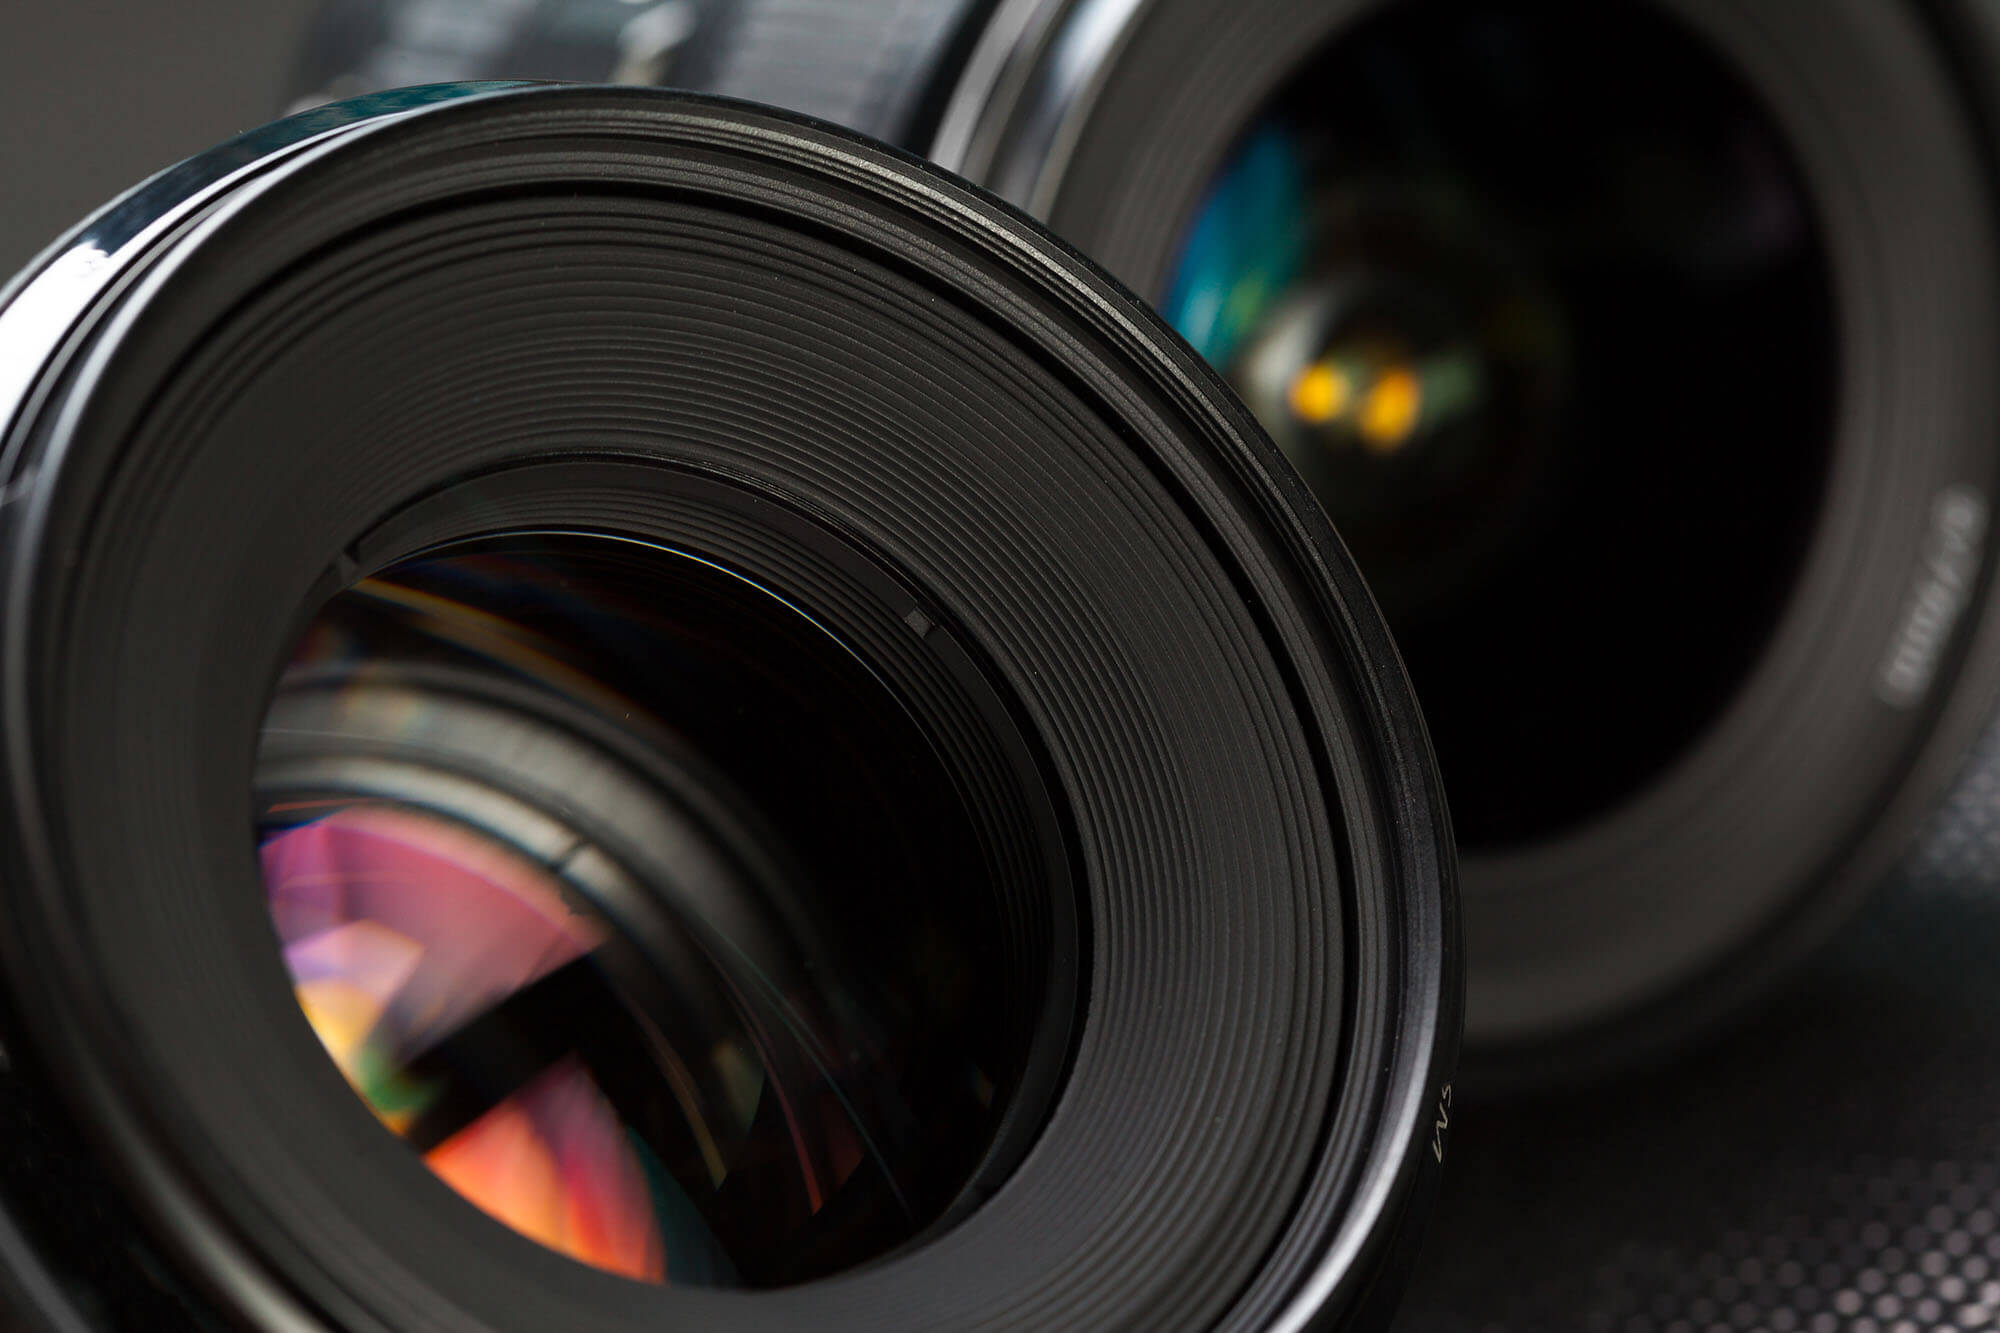 How to Choose the Best Lenses for Wedding Photography